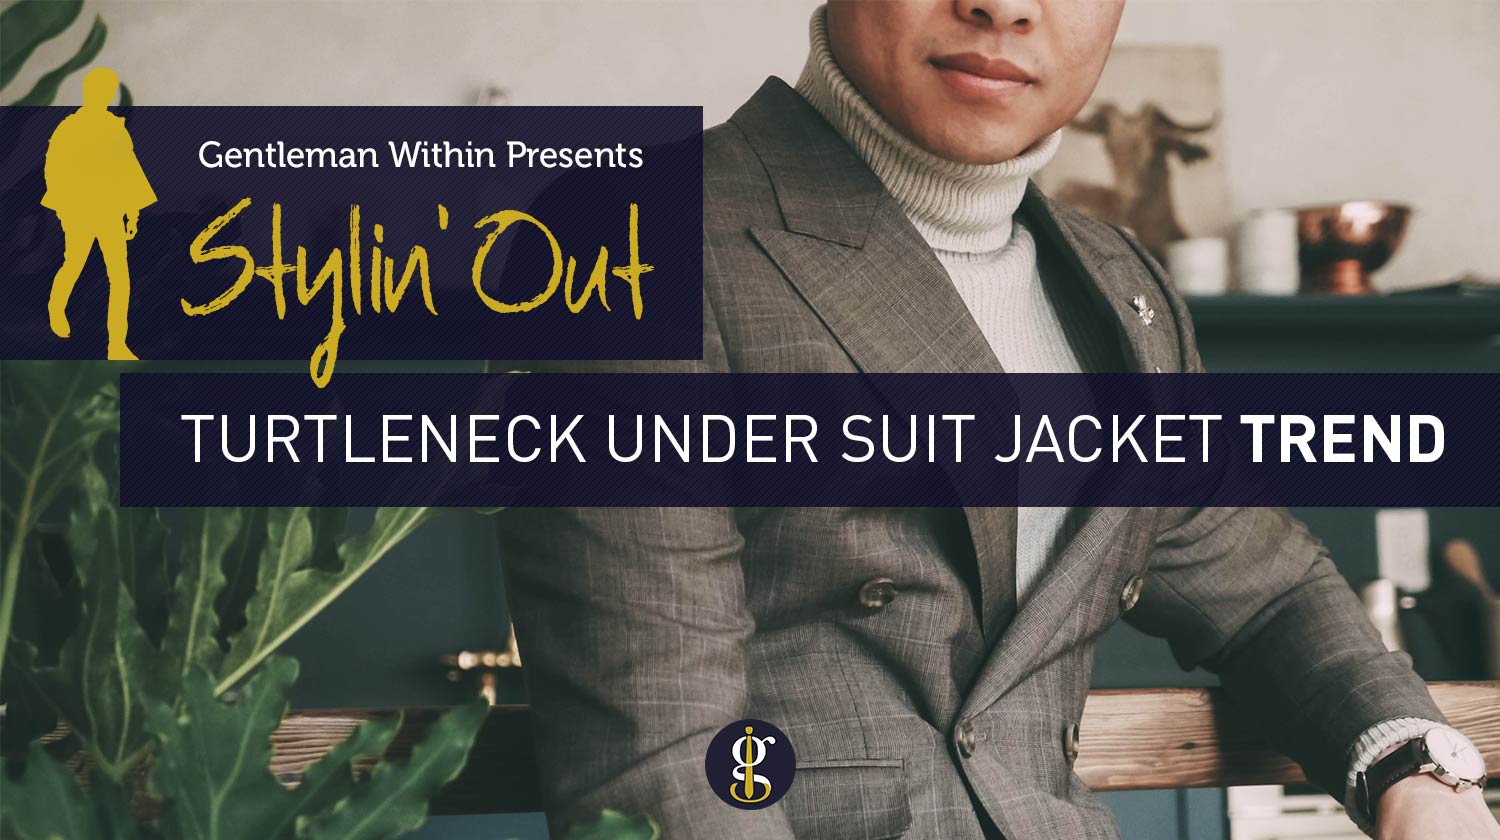 How To Wear A Turtleneck Sweater | GENTLEMAN WITHIN